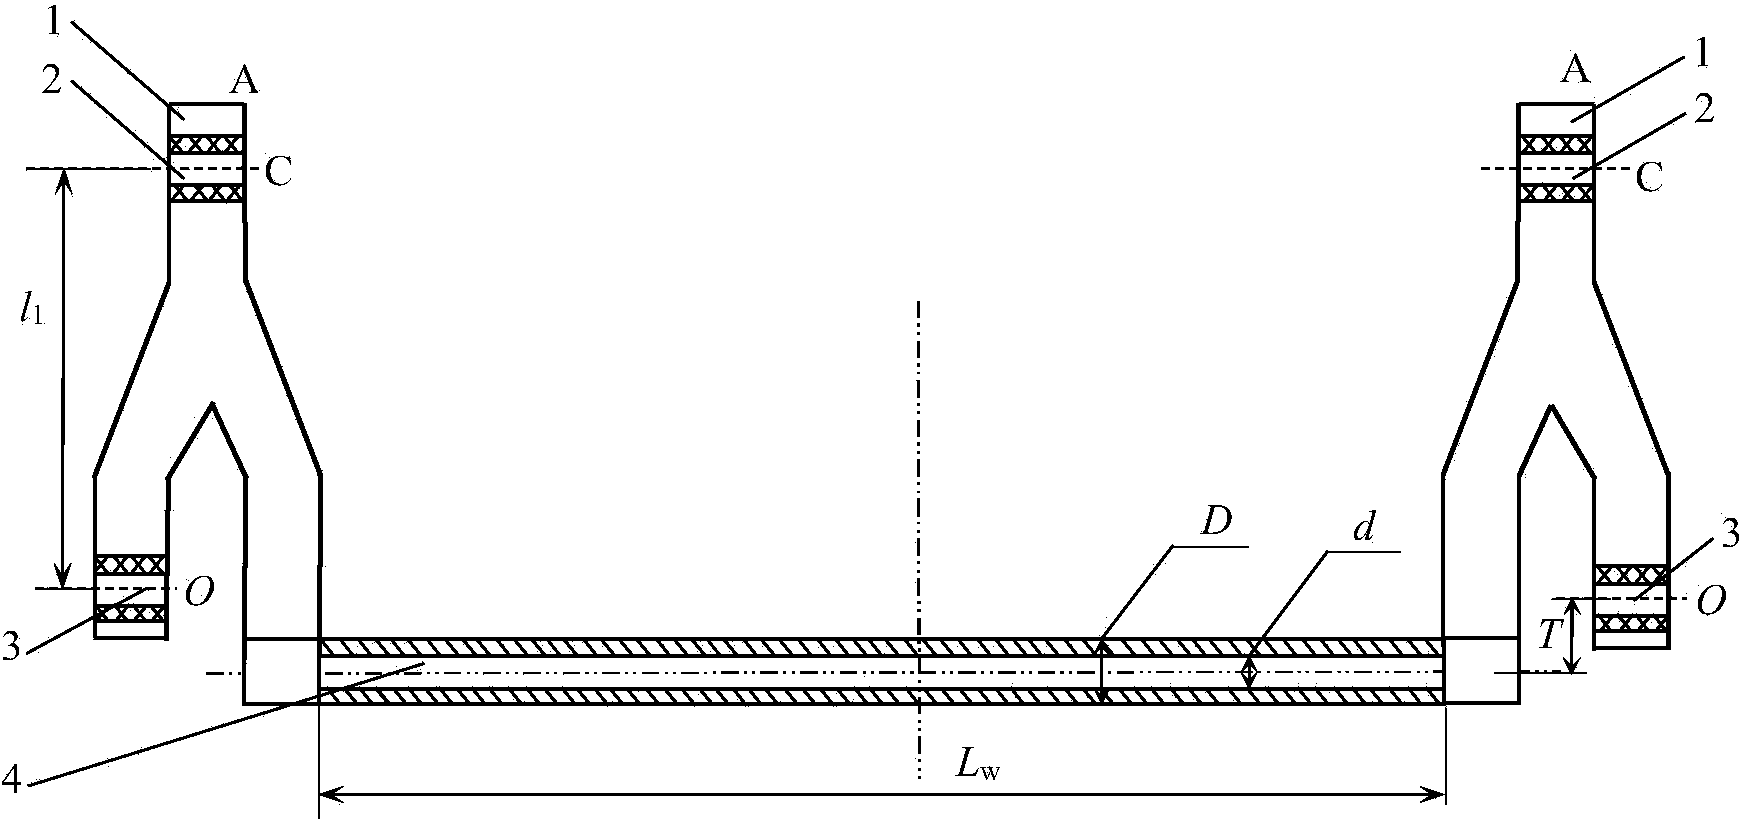 Torque tube stress intensity checking method for externally biased non-coaxial type cab stabilizer bar